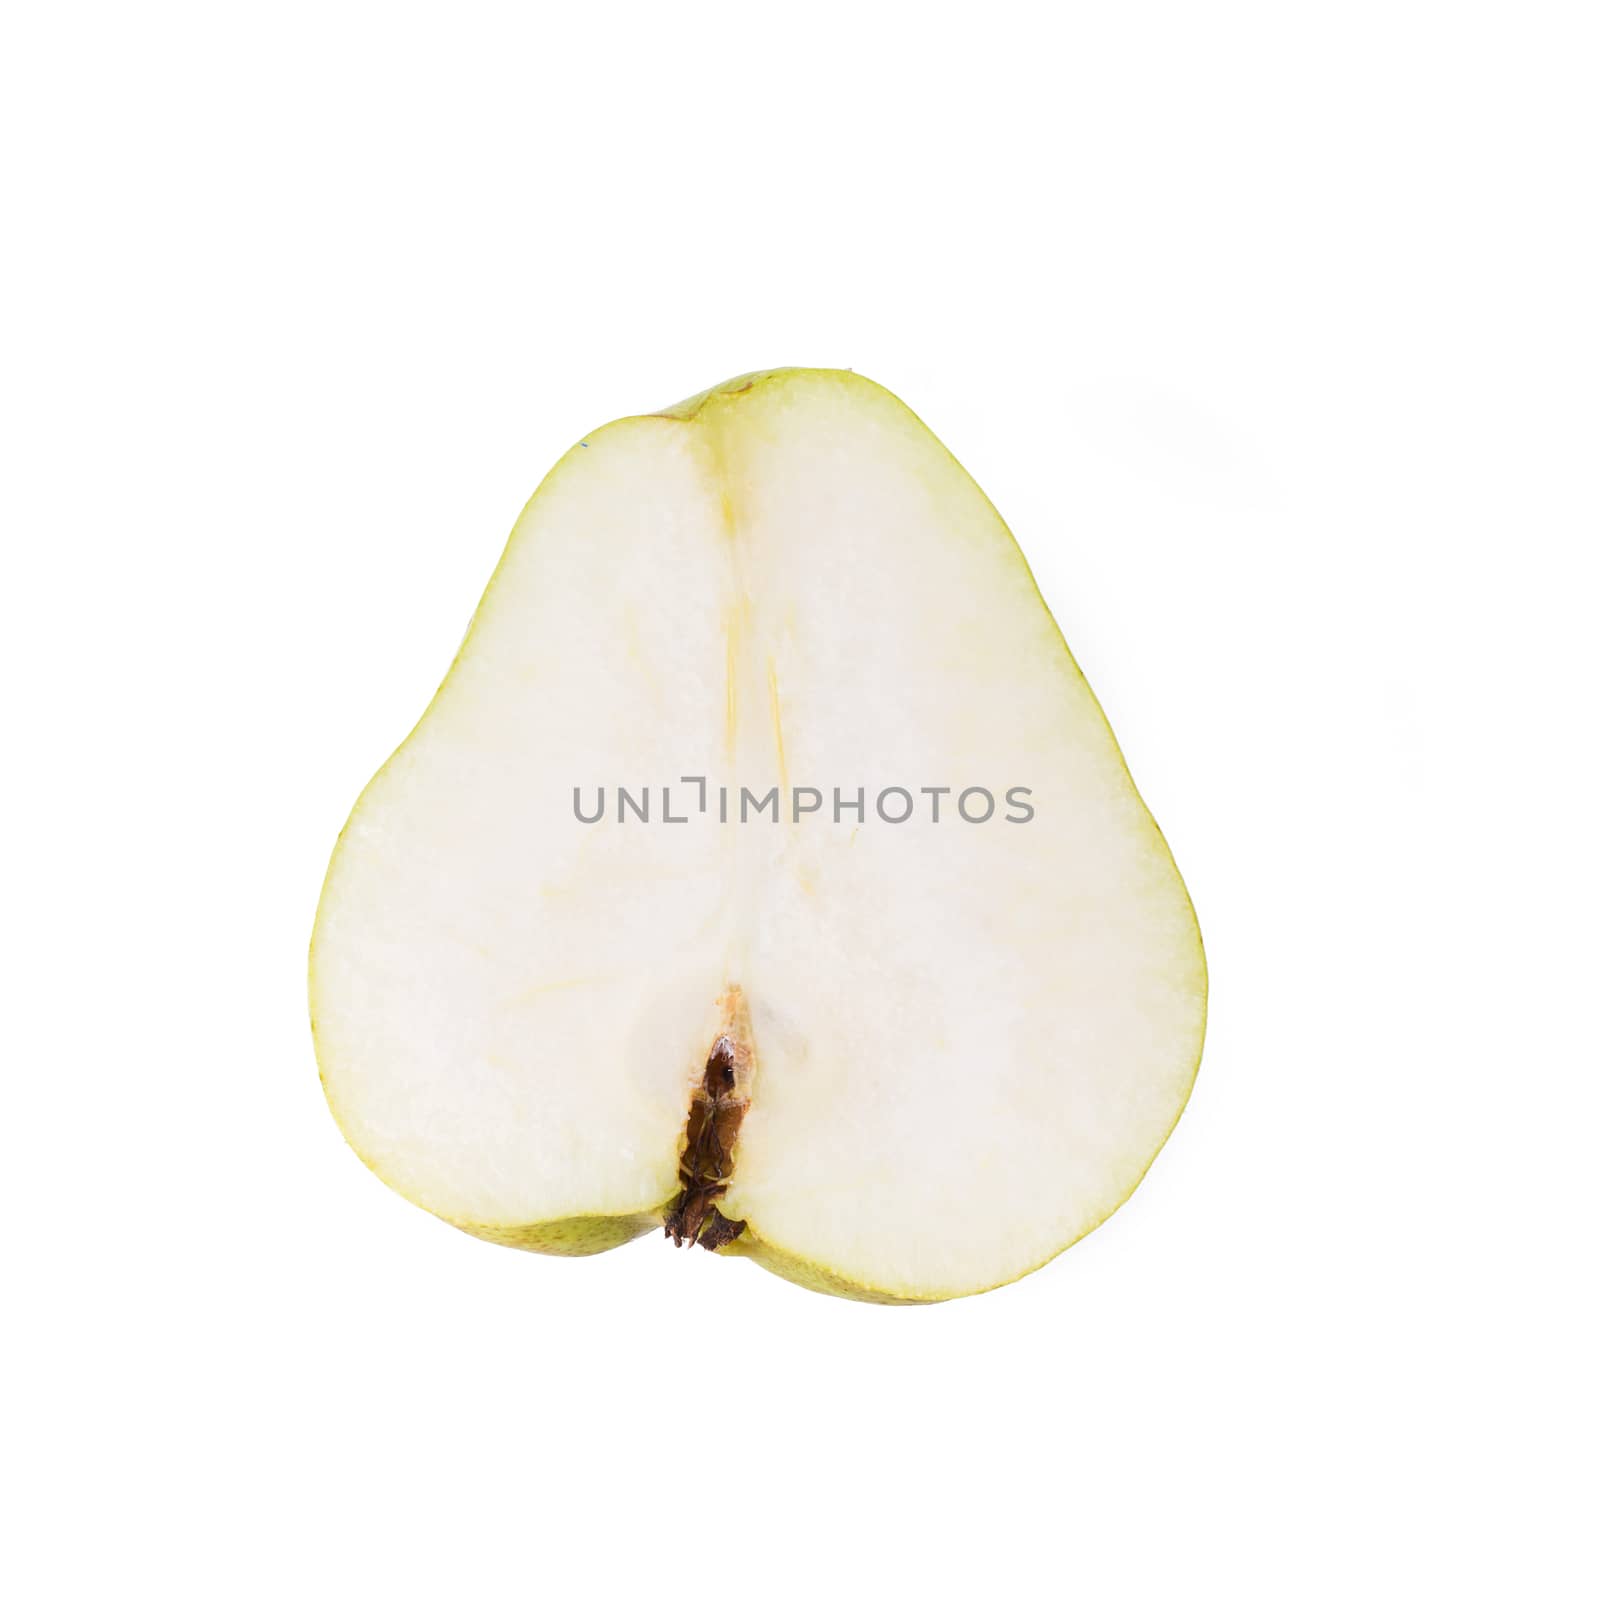 Pear with a cut isolated on white background by kaiskynet